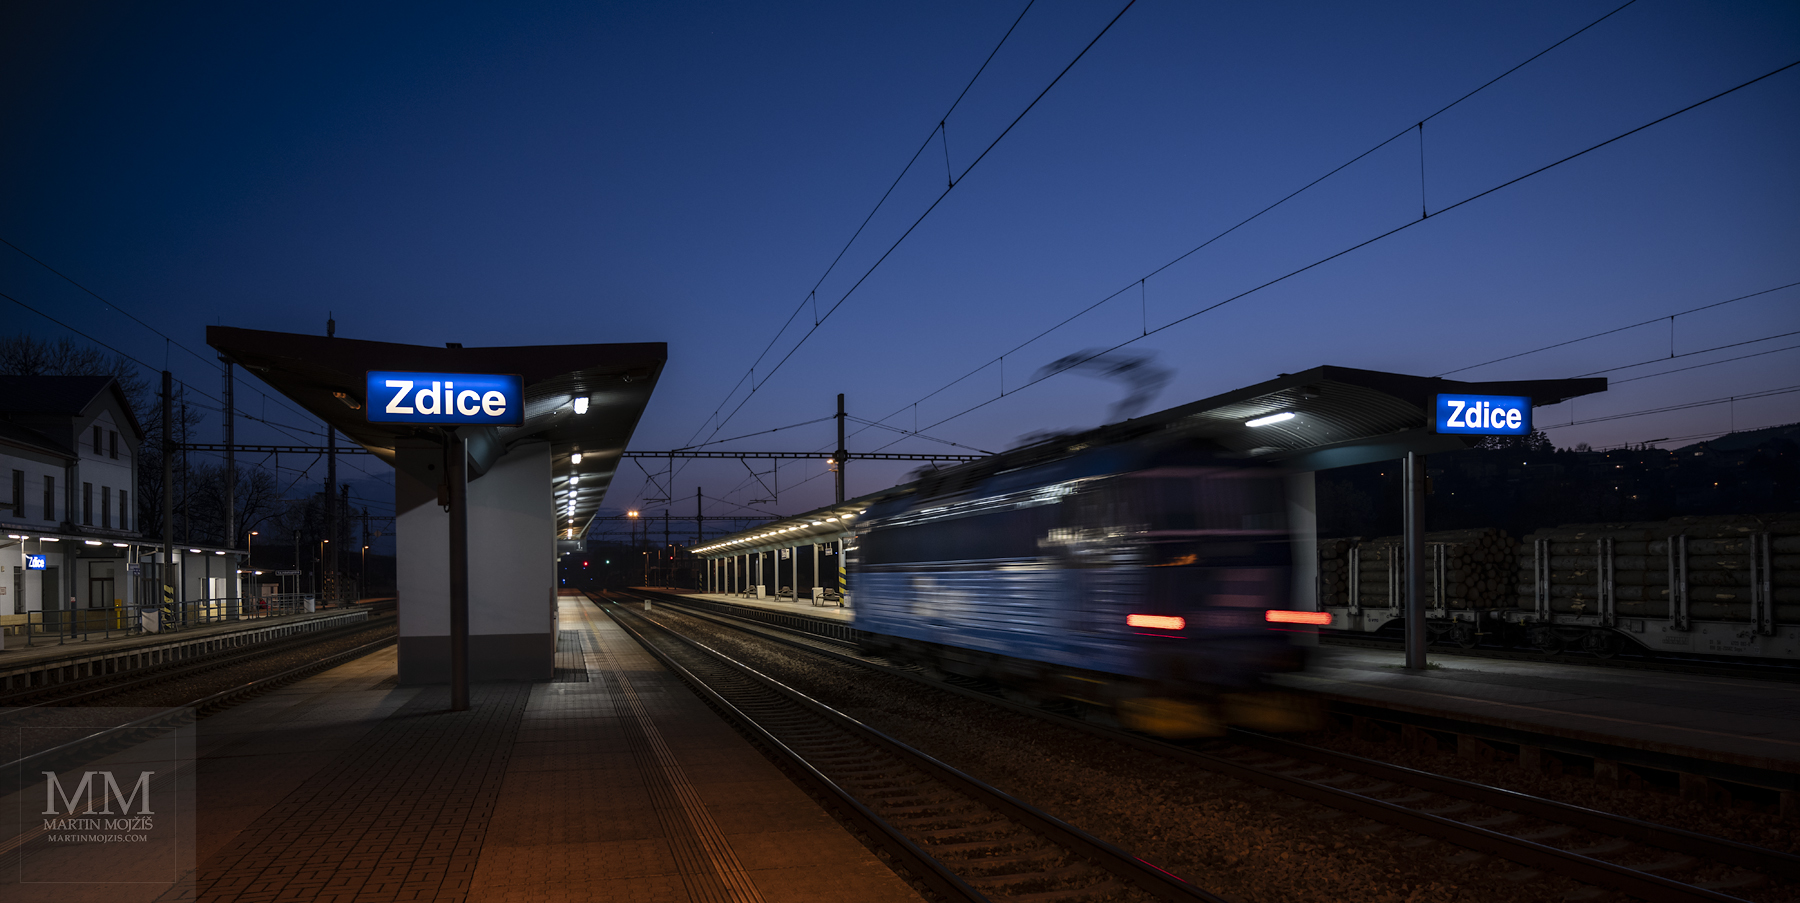 A locomotive passes through a station at dusk.